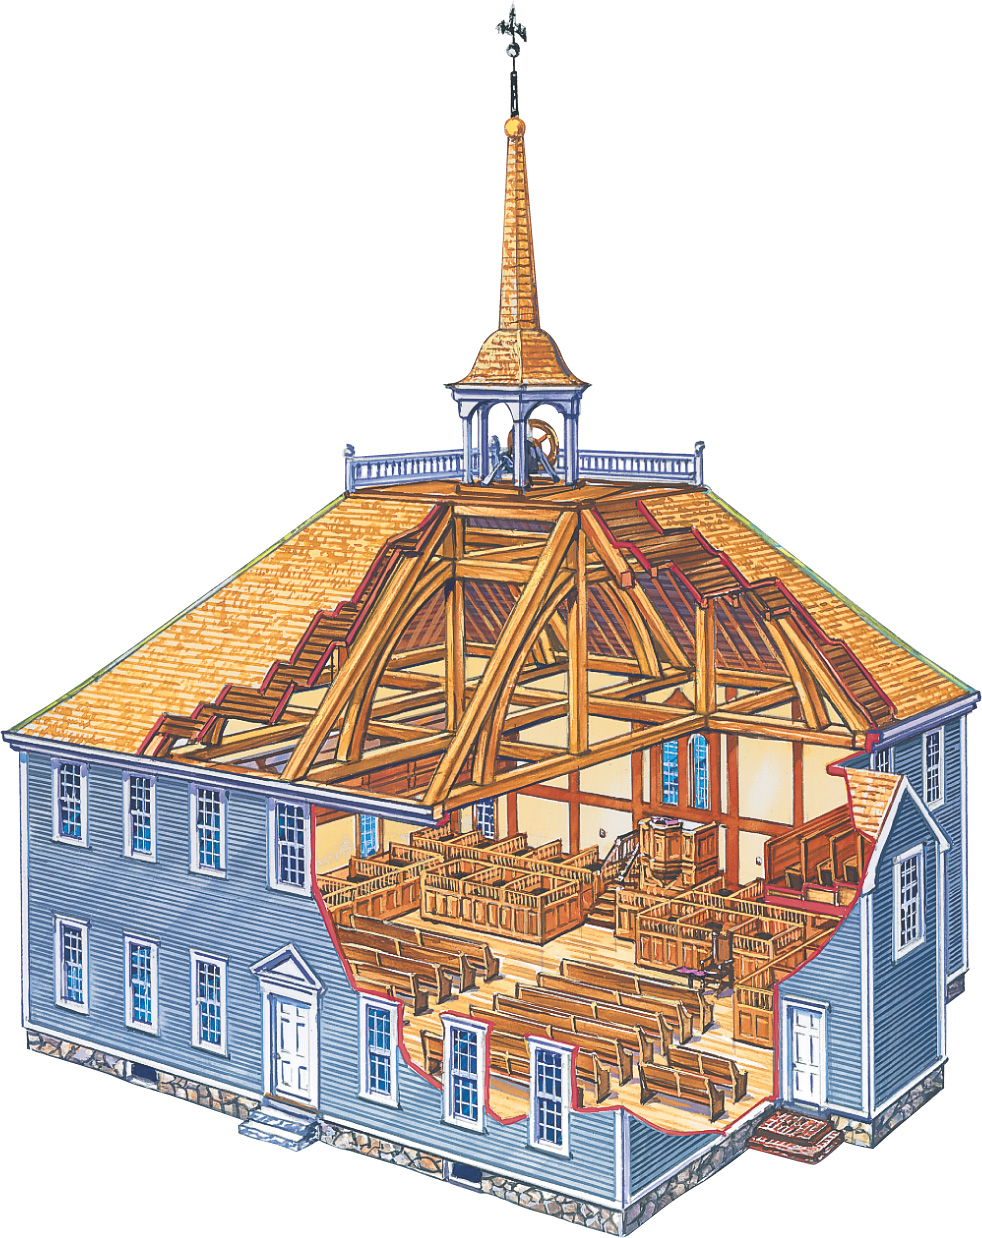 An cut-away diagram shows the inside and outside of a town hall building.